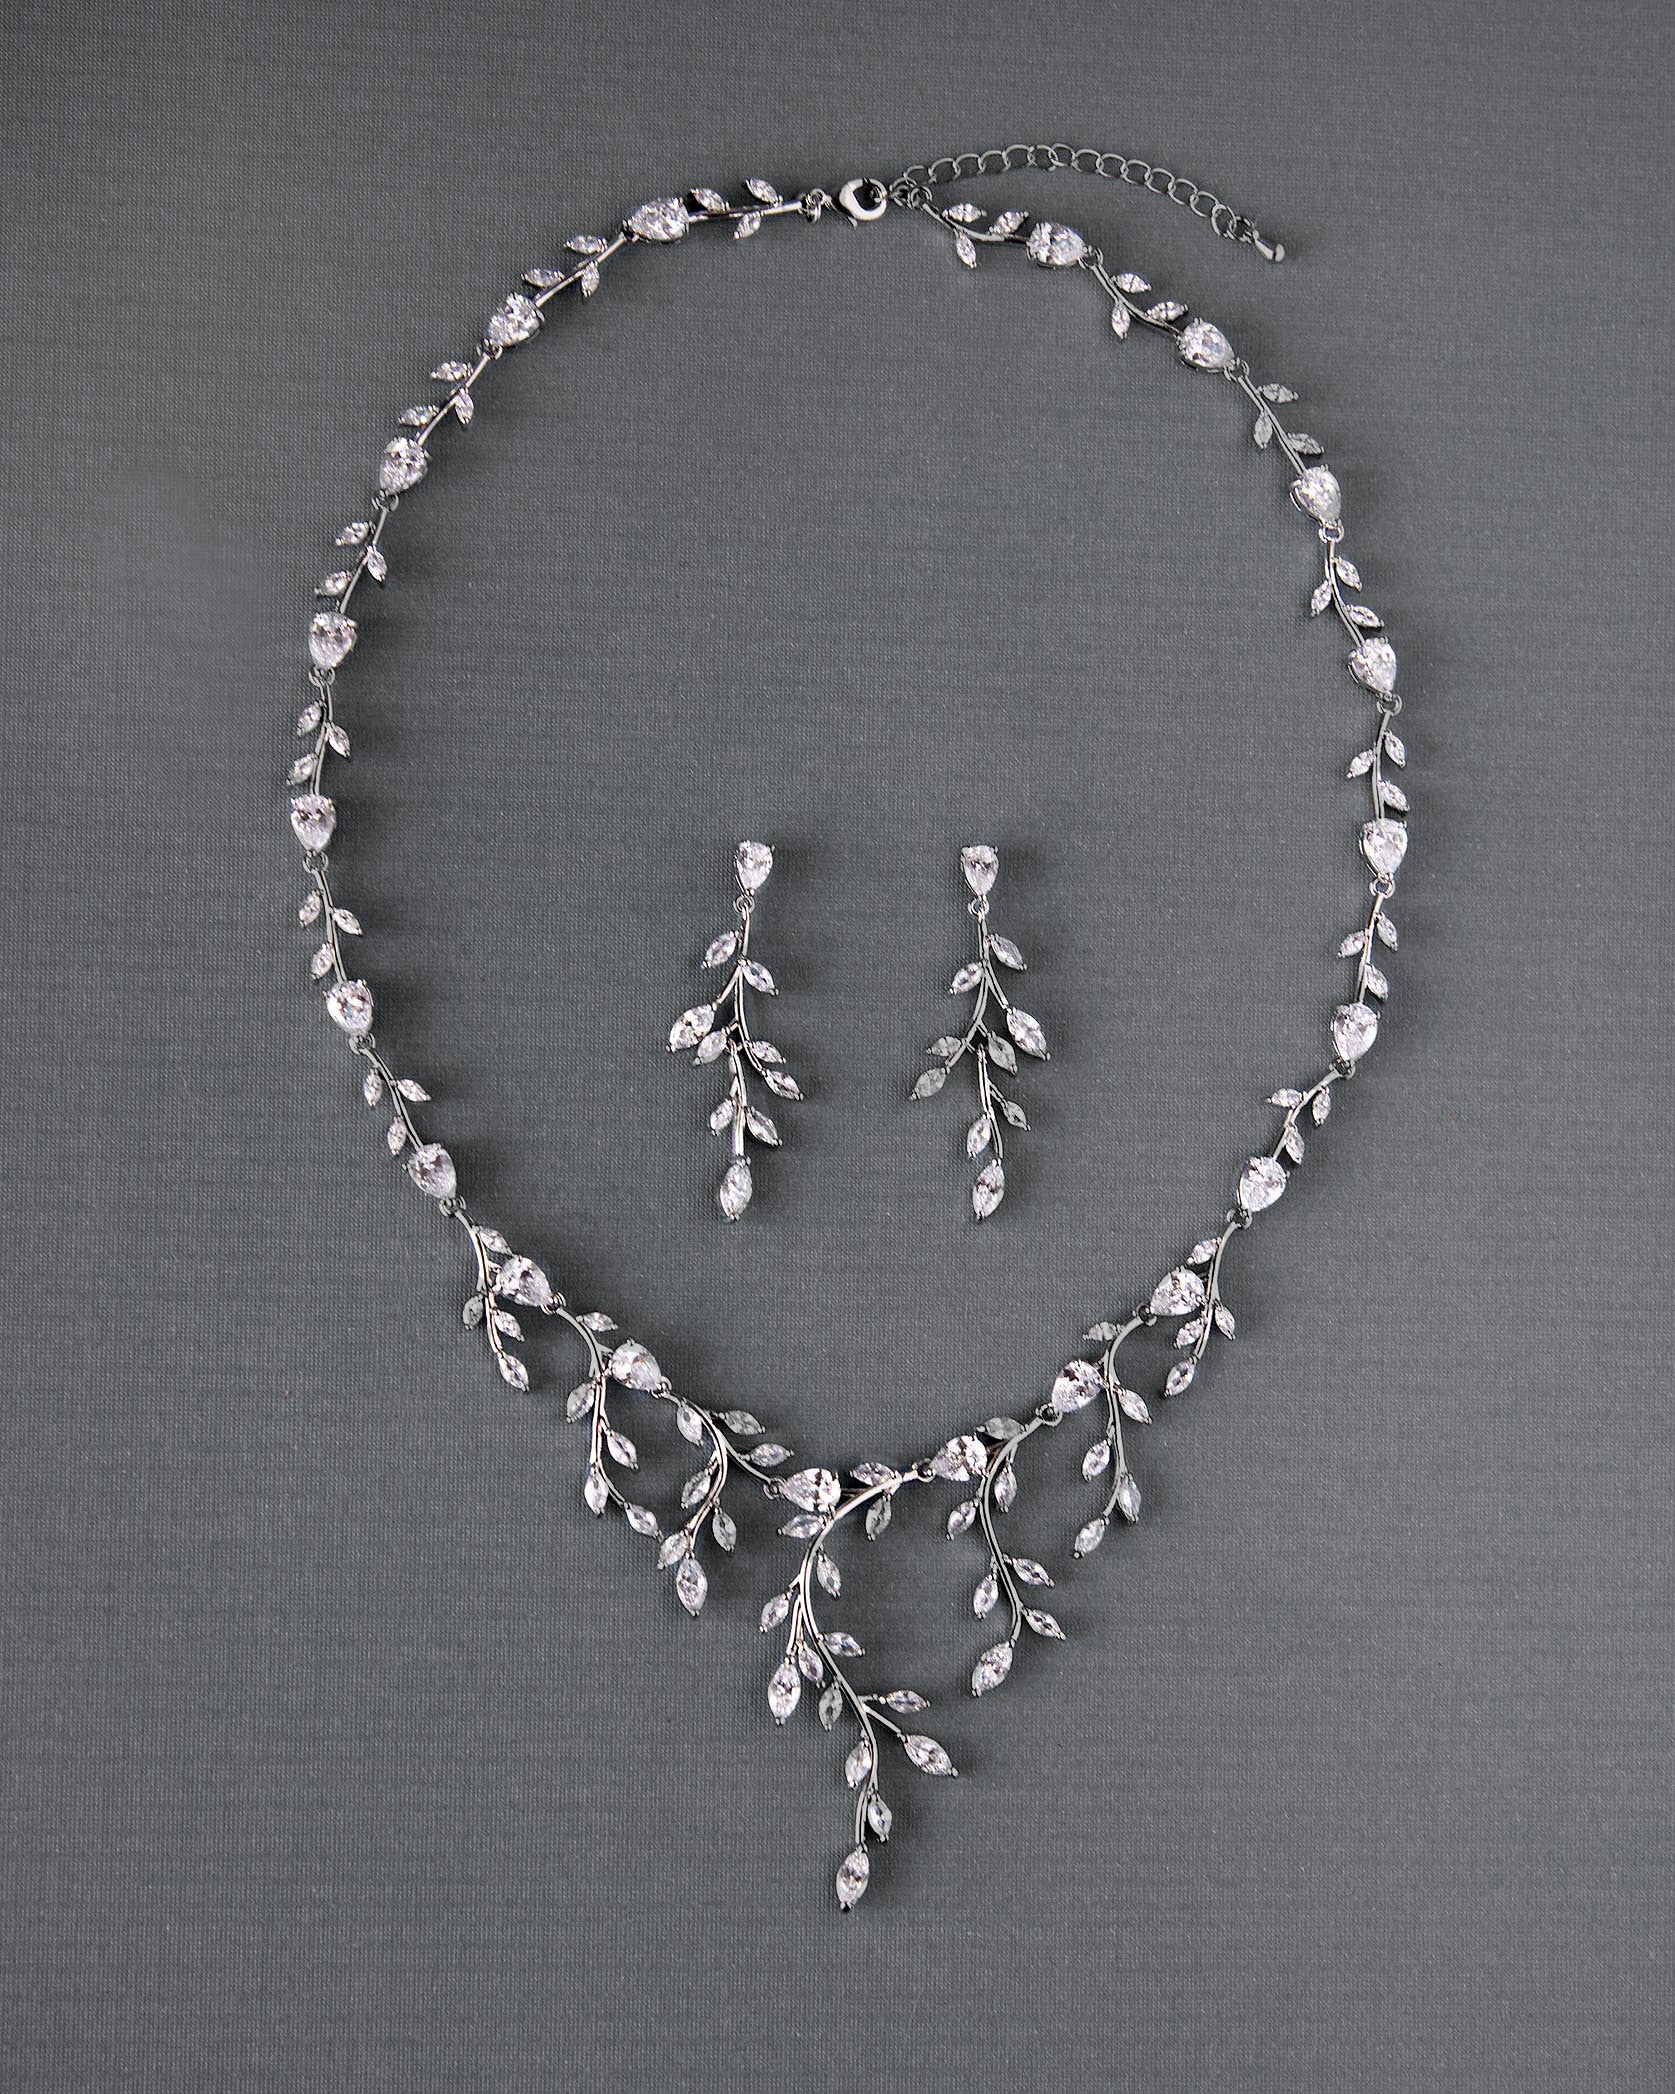 Bridal Necklace and Earrings of Marquise CZ Vines - Cassandra Lynne